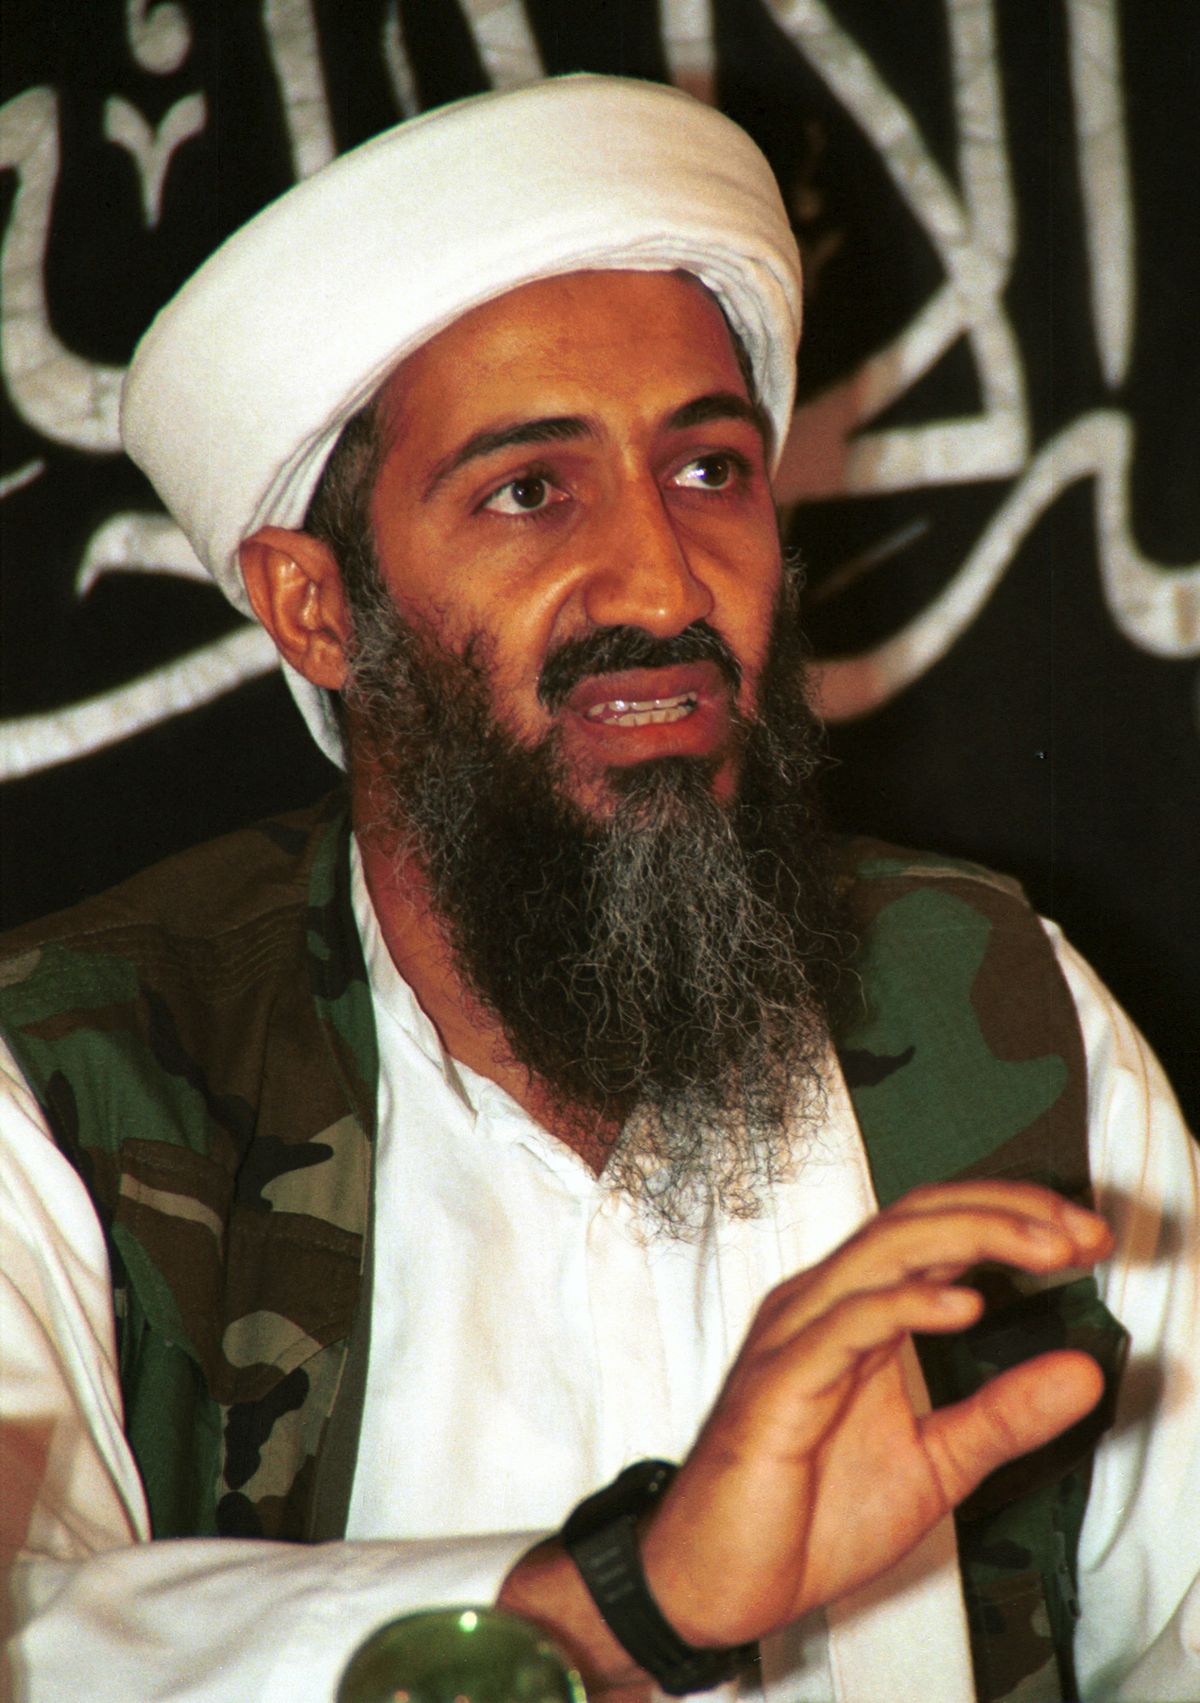 FILE - In this 1998 file photo, Osama bin Laden speaks to the journalists in Khost, Afghanistan and made available Friday March 19, 2004. A person familiar with developments said Sunday, May 1, 2011 that bin Laden is dead and the U.S. has the body. (Mazhar Khan / Associated Press)